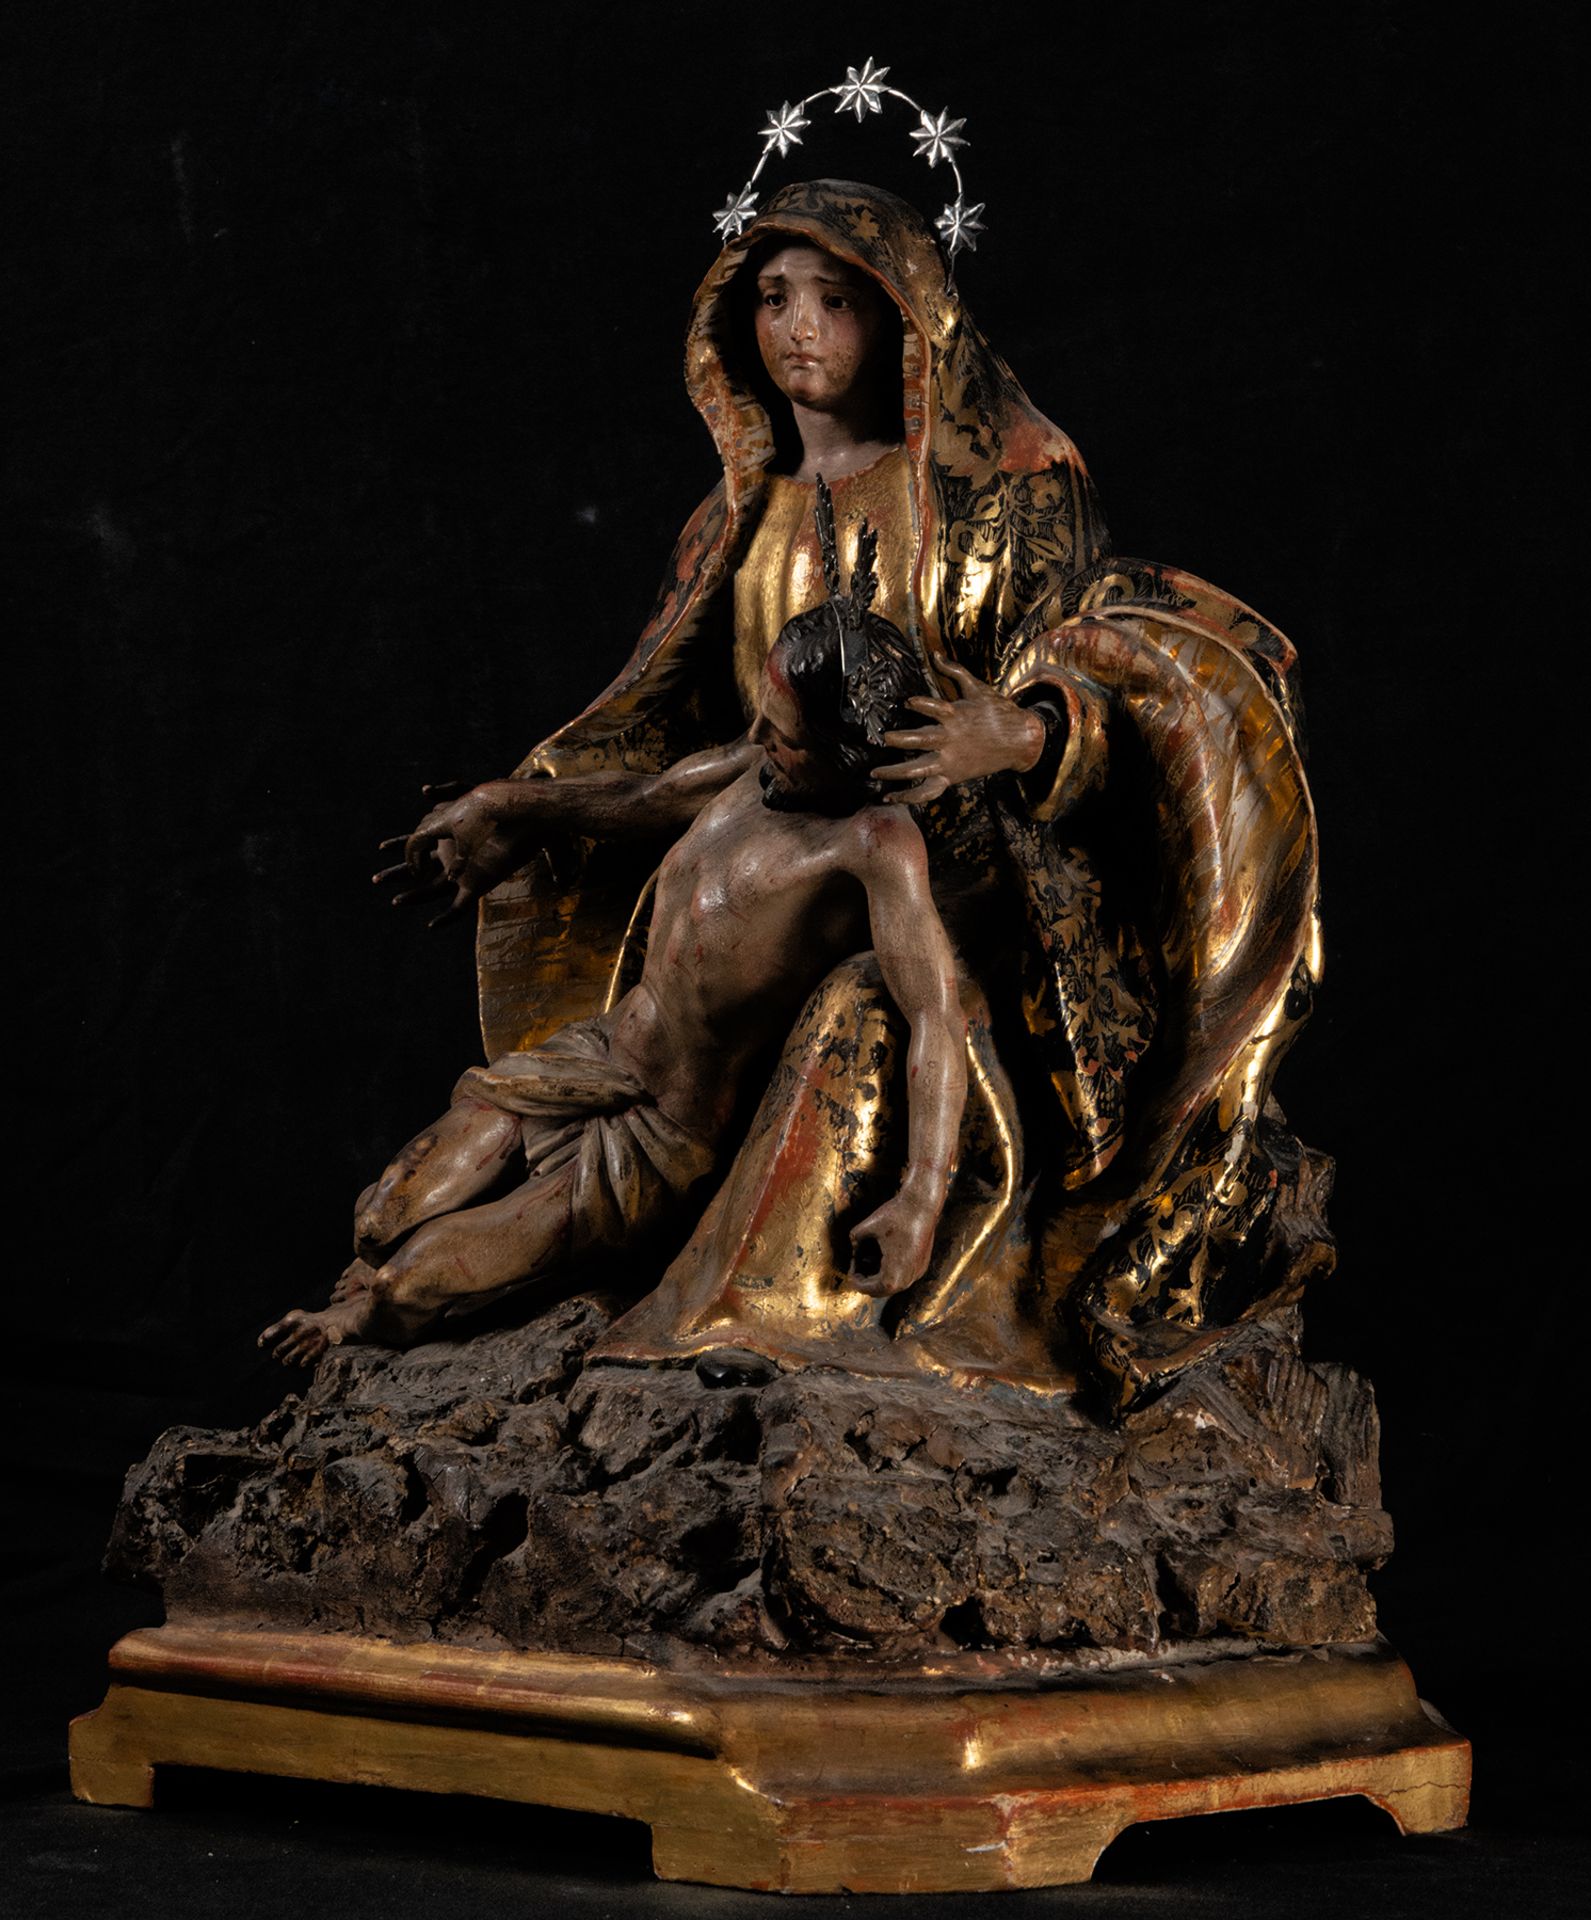 Exceptional Pieta depicting Mary with Christ in her arms, Guatemala, early 18th century Novohisopano - Image 3 of 8